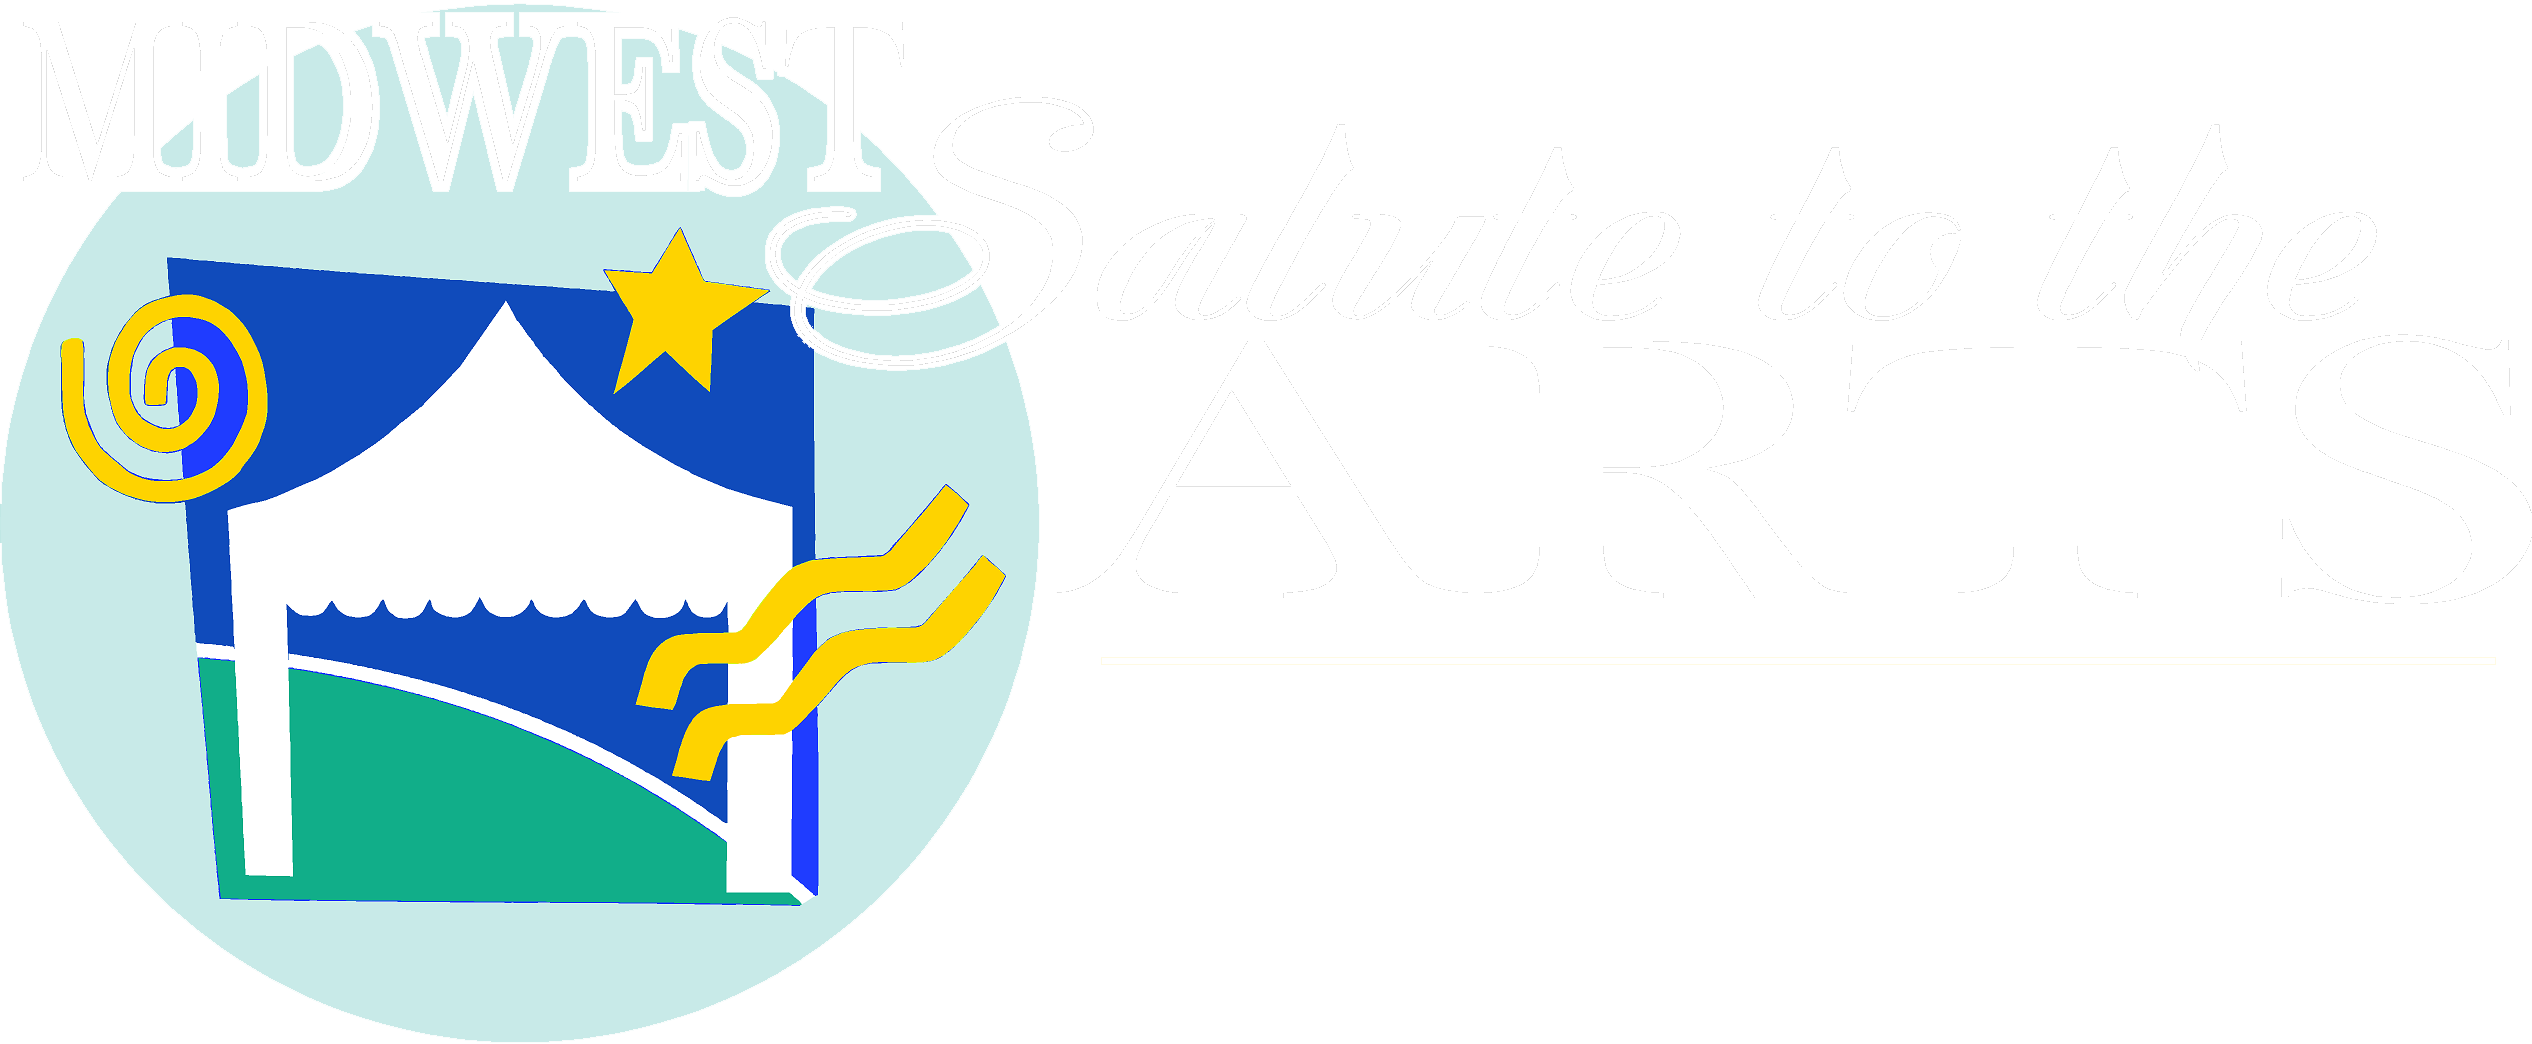 Salute Logo - Midwest Salute to the Arts Festival | August 24-26, 2018